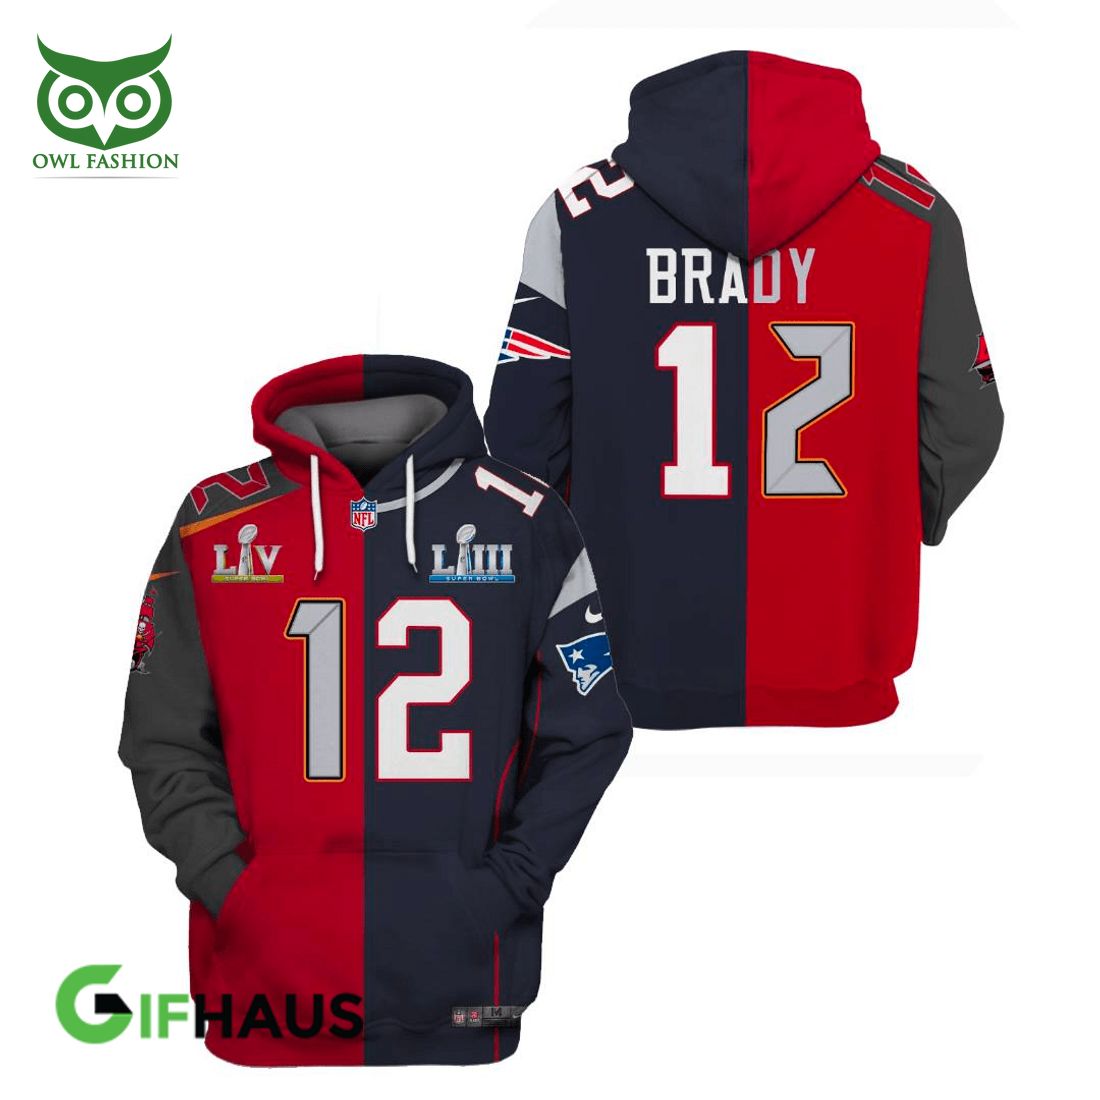 tom brandy nfl legend red and gray 3d hoodie 1 itmeI